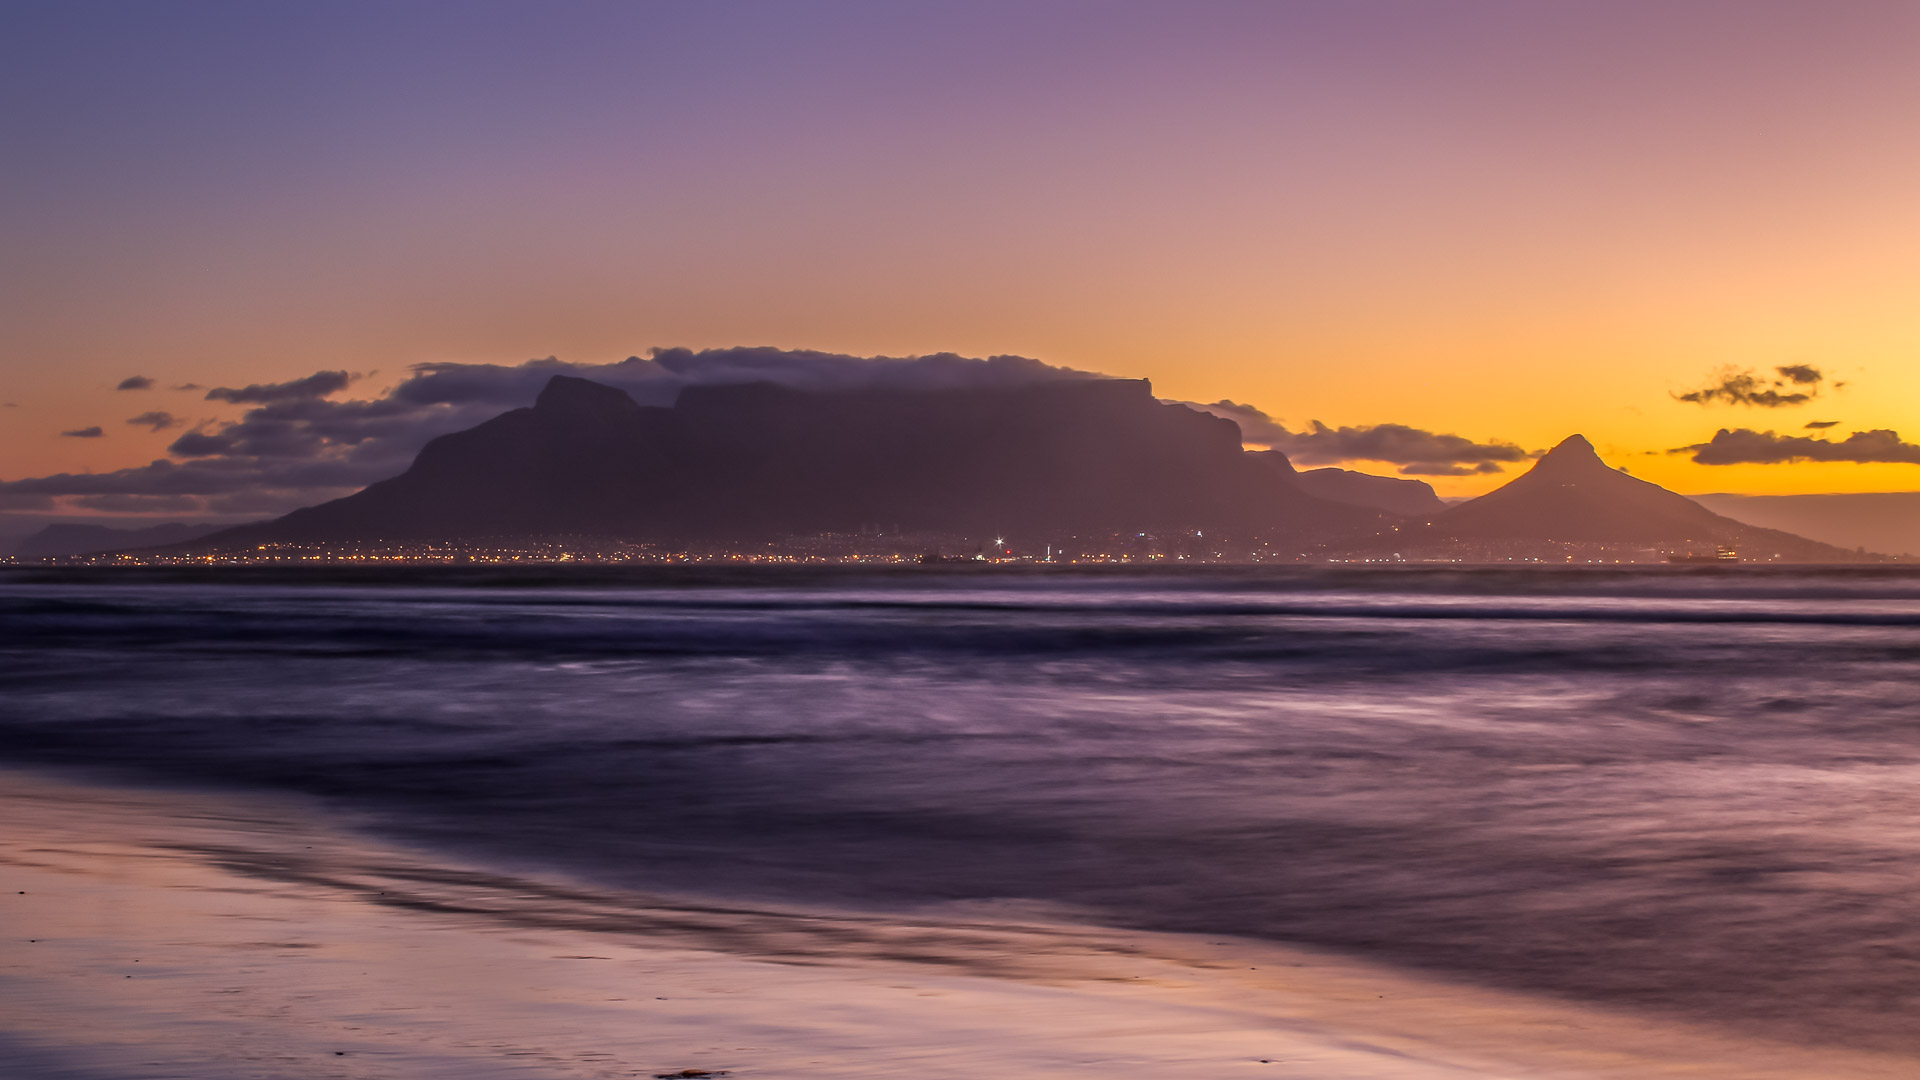 Golden hour sunset over table mountain in Cape Town, South Africa